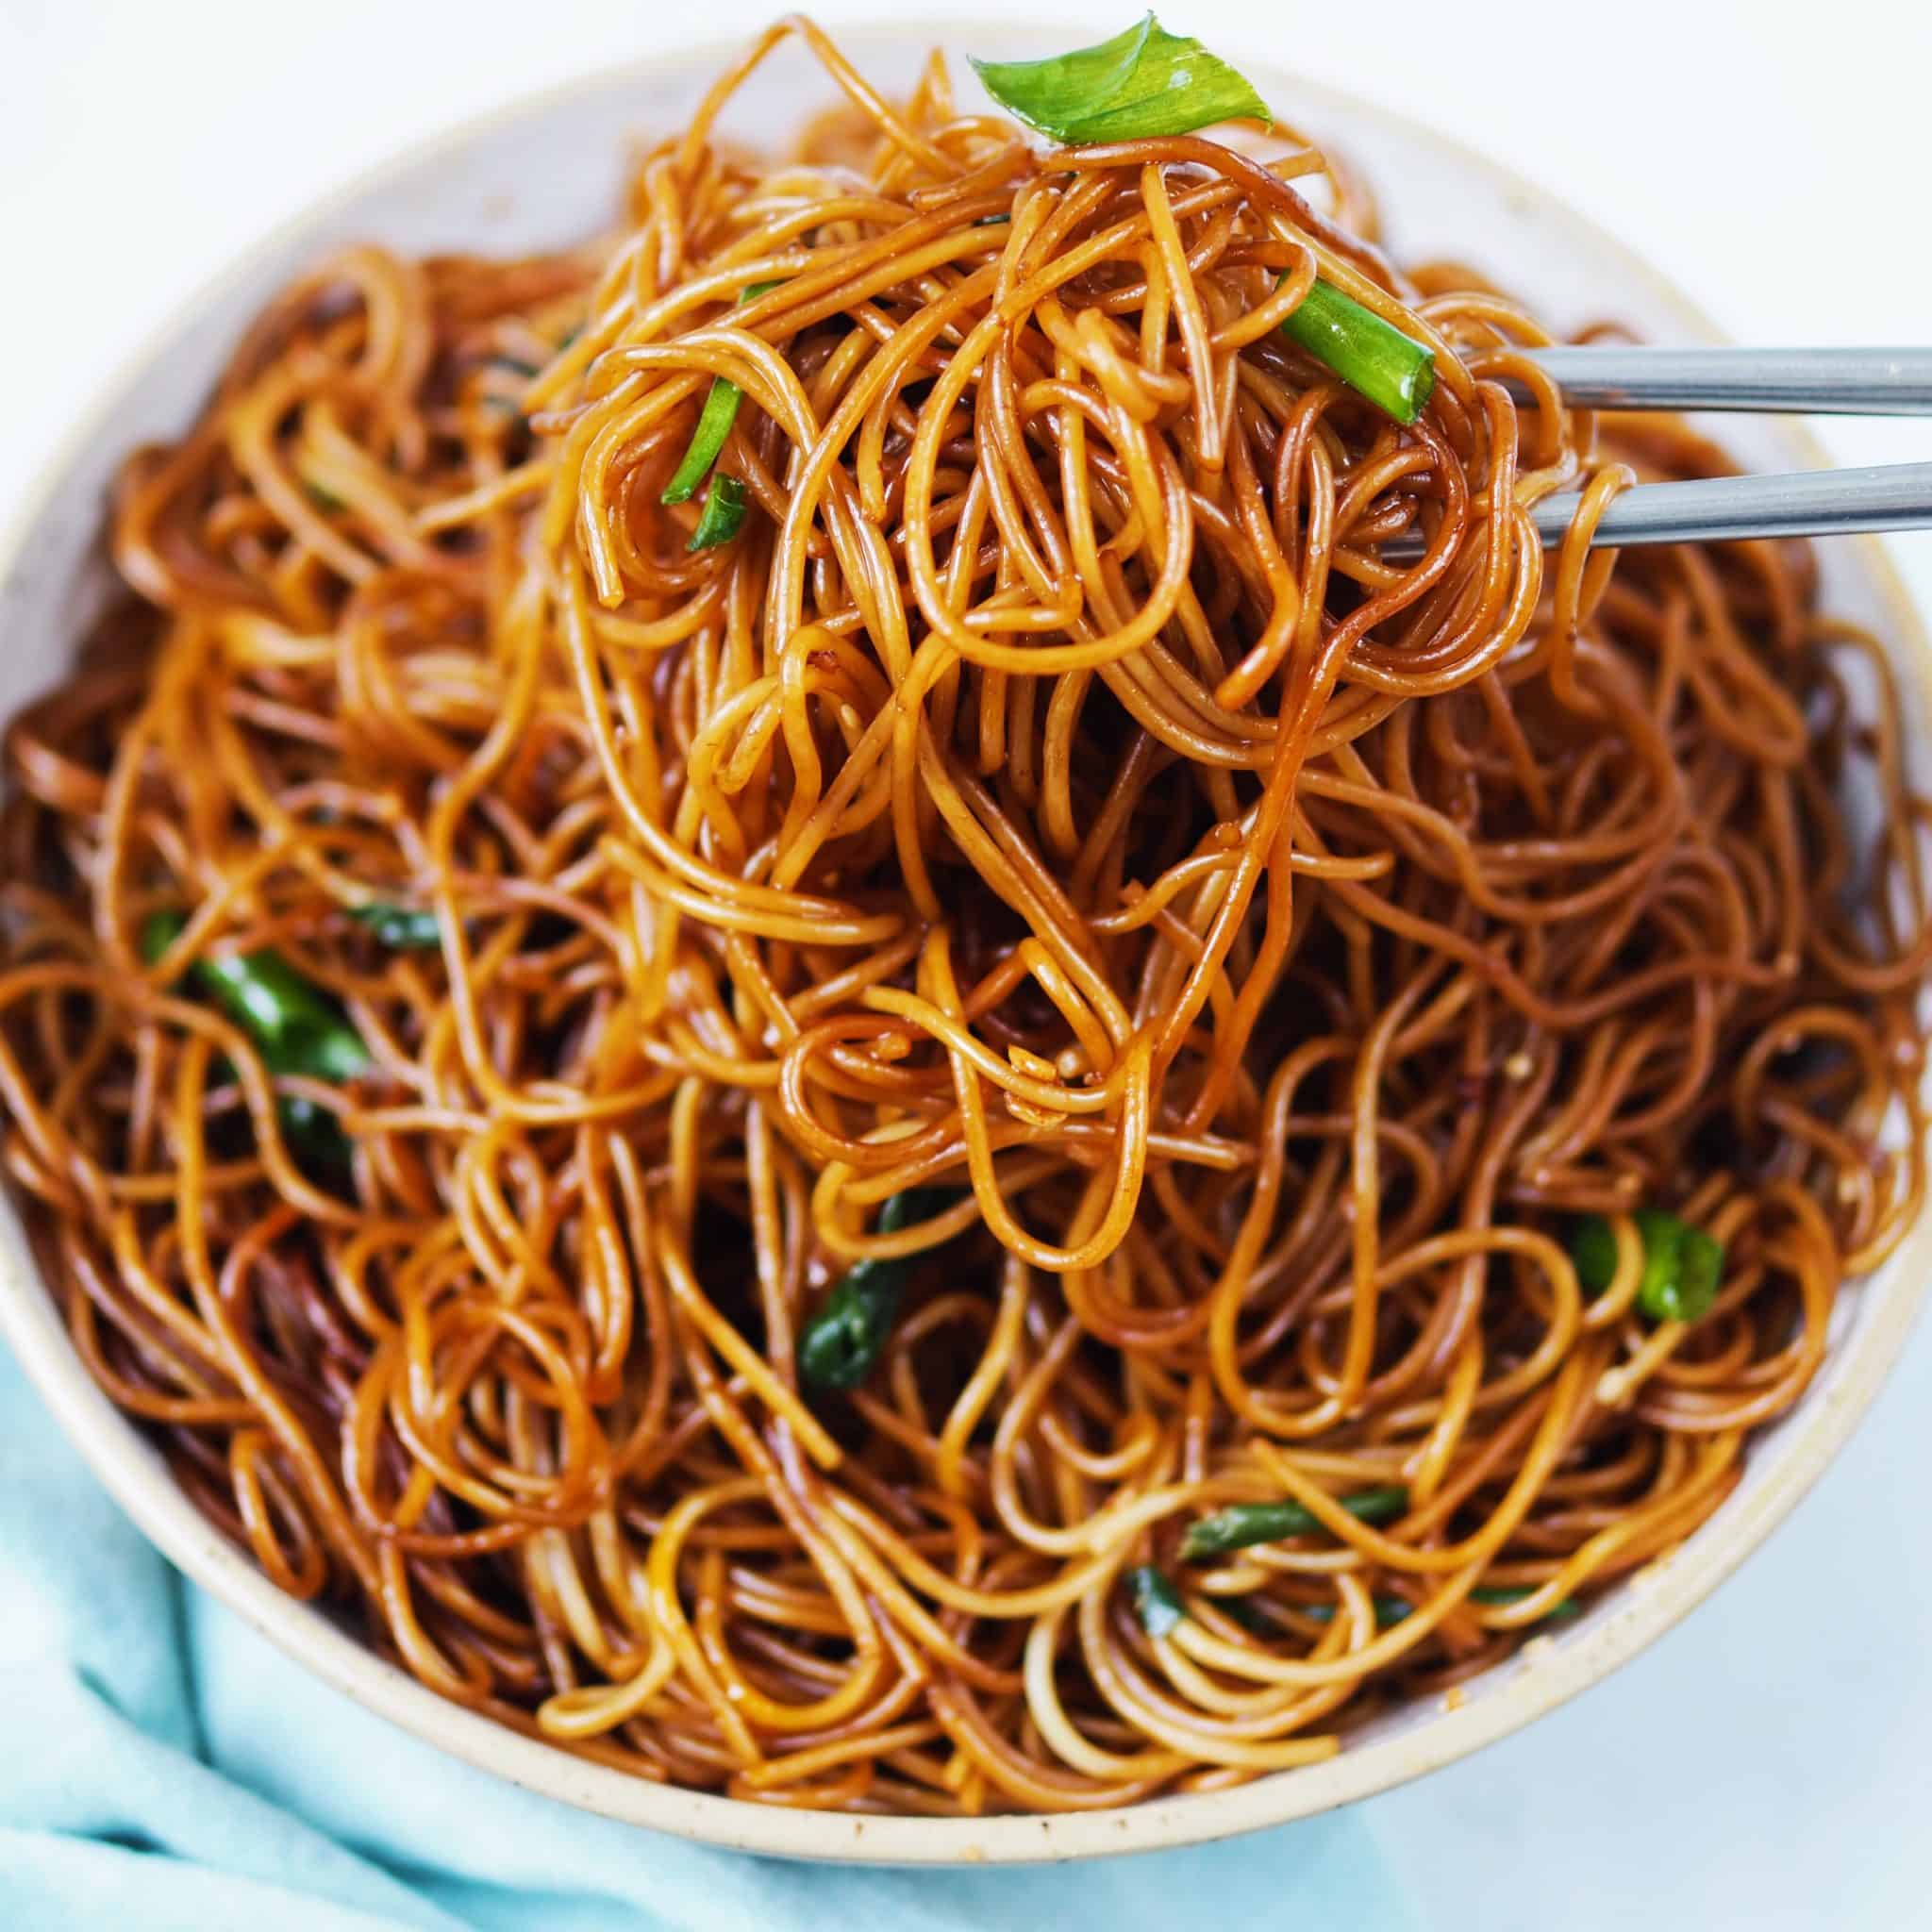 Chinese Scallion Oil Noodles (10-minute Recipe) - Christie a